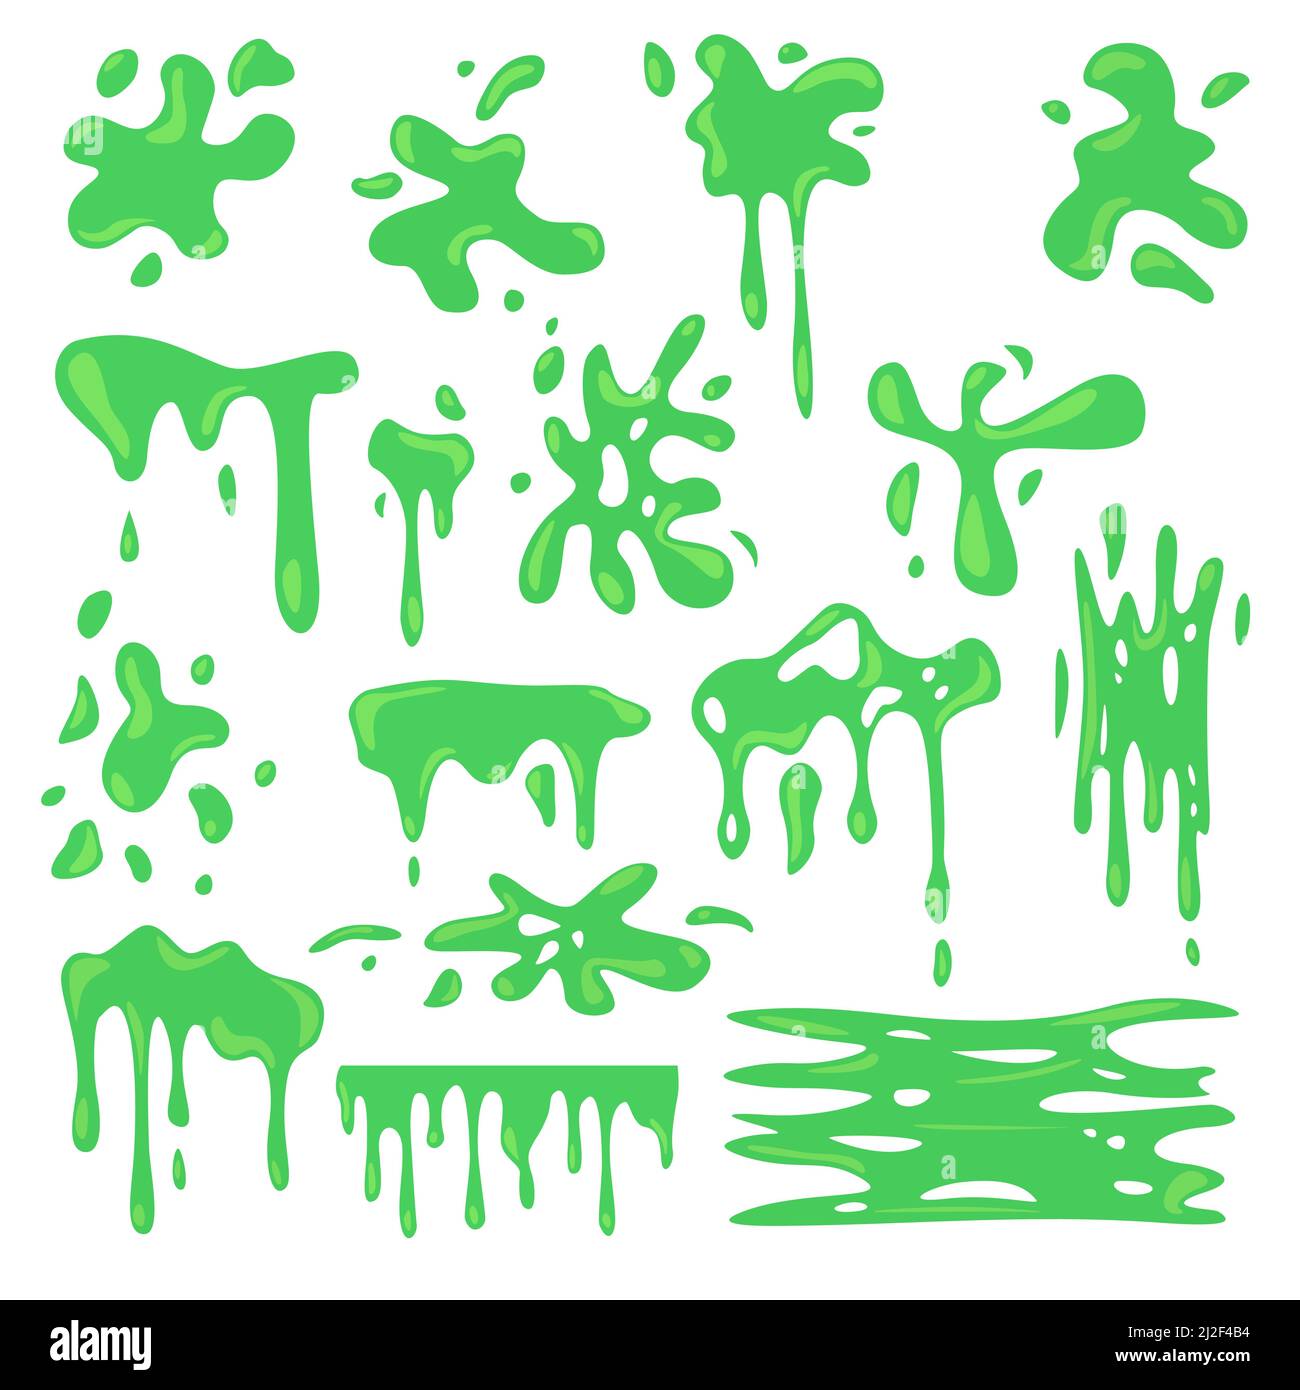 Toxic various green slime flat set for web design. Cartoon slimy goo splashes, blobs and mucus drops isolated vector illustration collection. Decorati Stock Vector